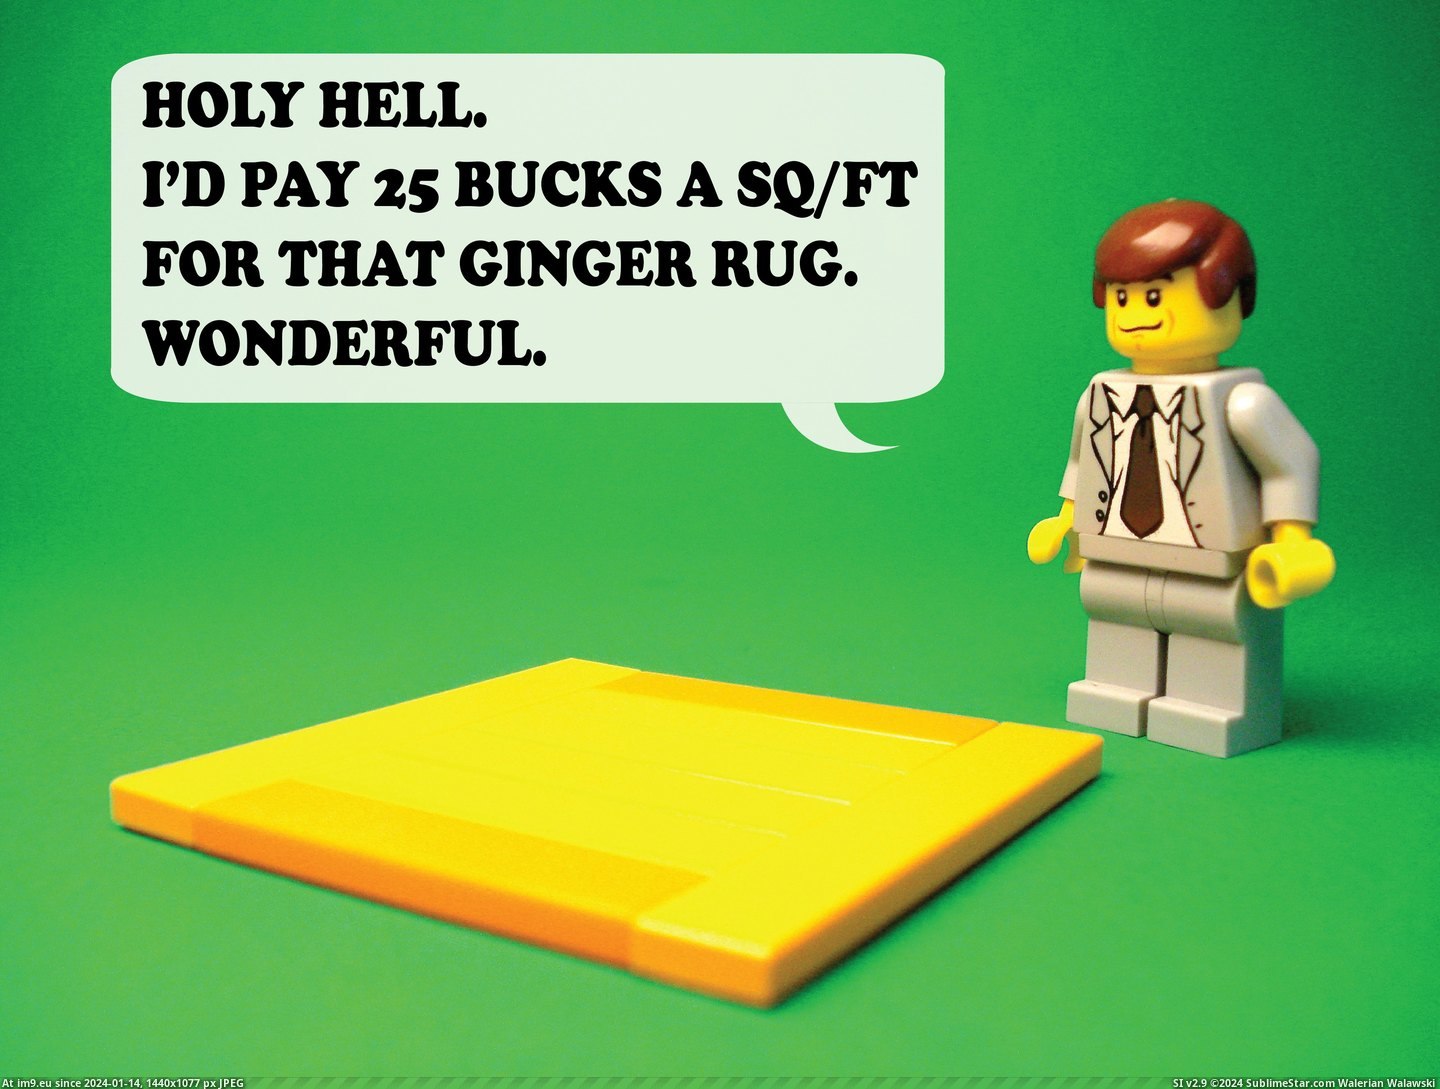 #Funny #Illustrated #Creeper #Lego [Funny] -r-gonewild creeper comments, illustrated with LEGO 9 Pic. (Image of album My r/FUNNY favs))